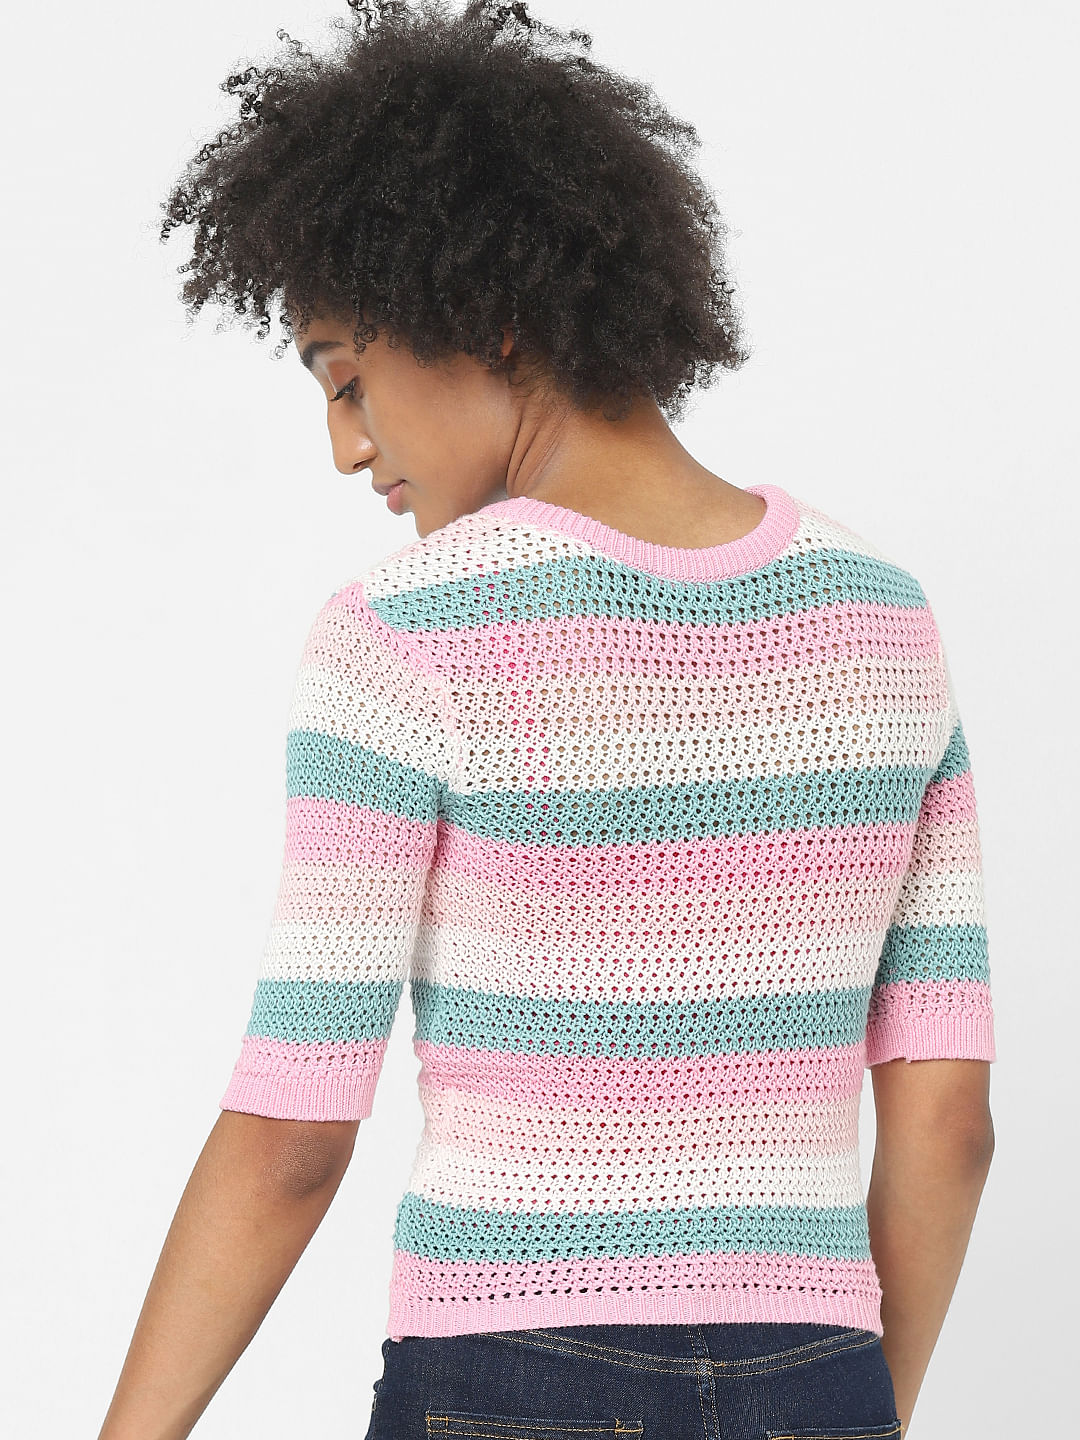 knit tops